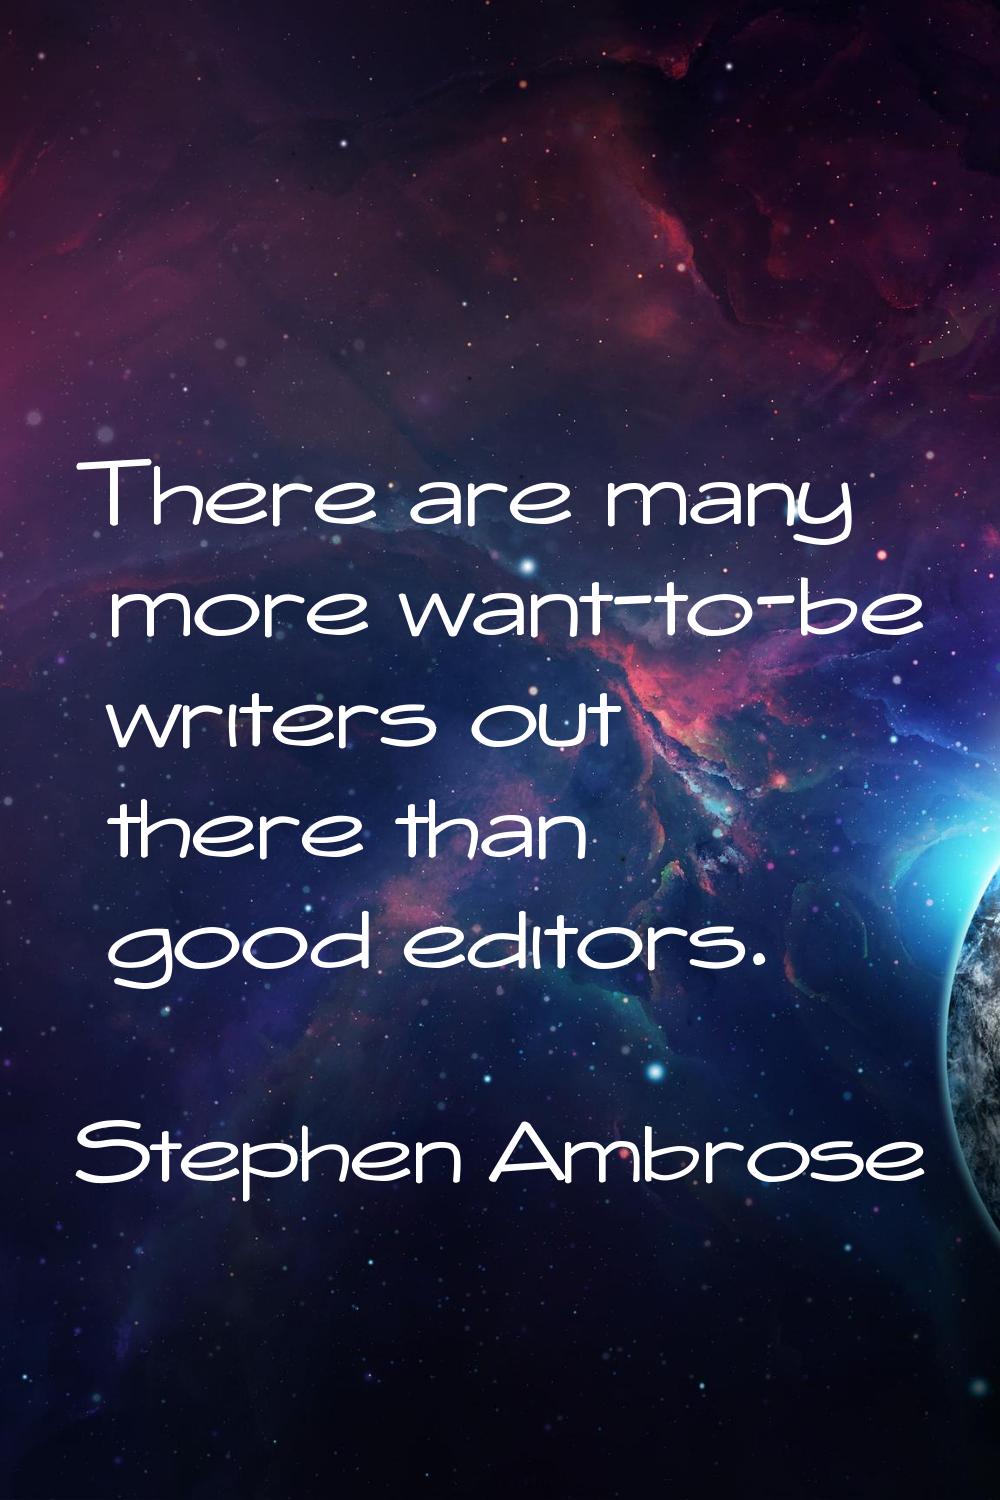 There are many more want-to-be writers out there than good editors.